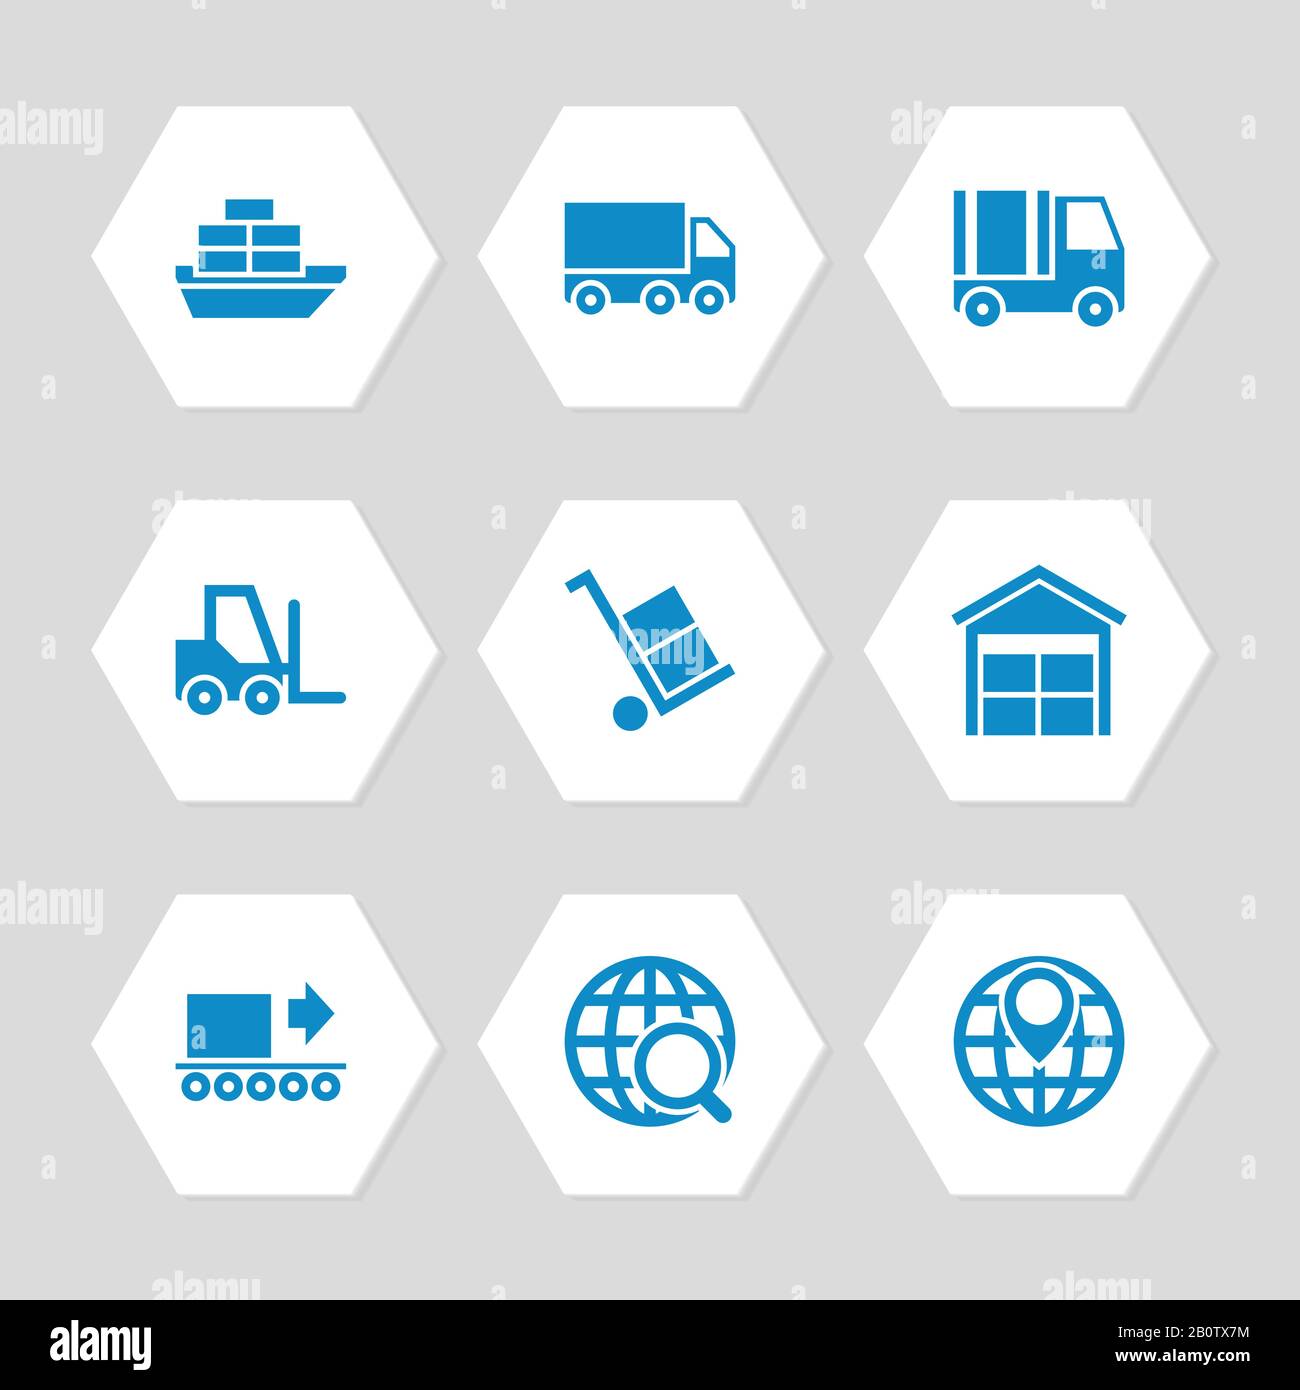 Logistic delivery and transportation icons set. Transportation icon flat design, vector illustration Stock Vector